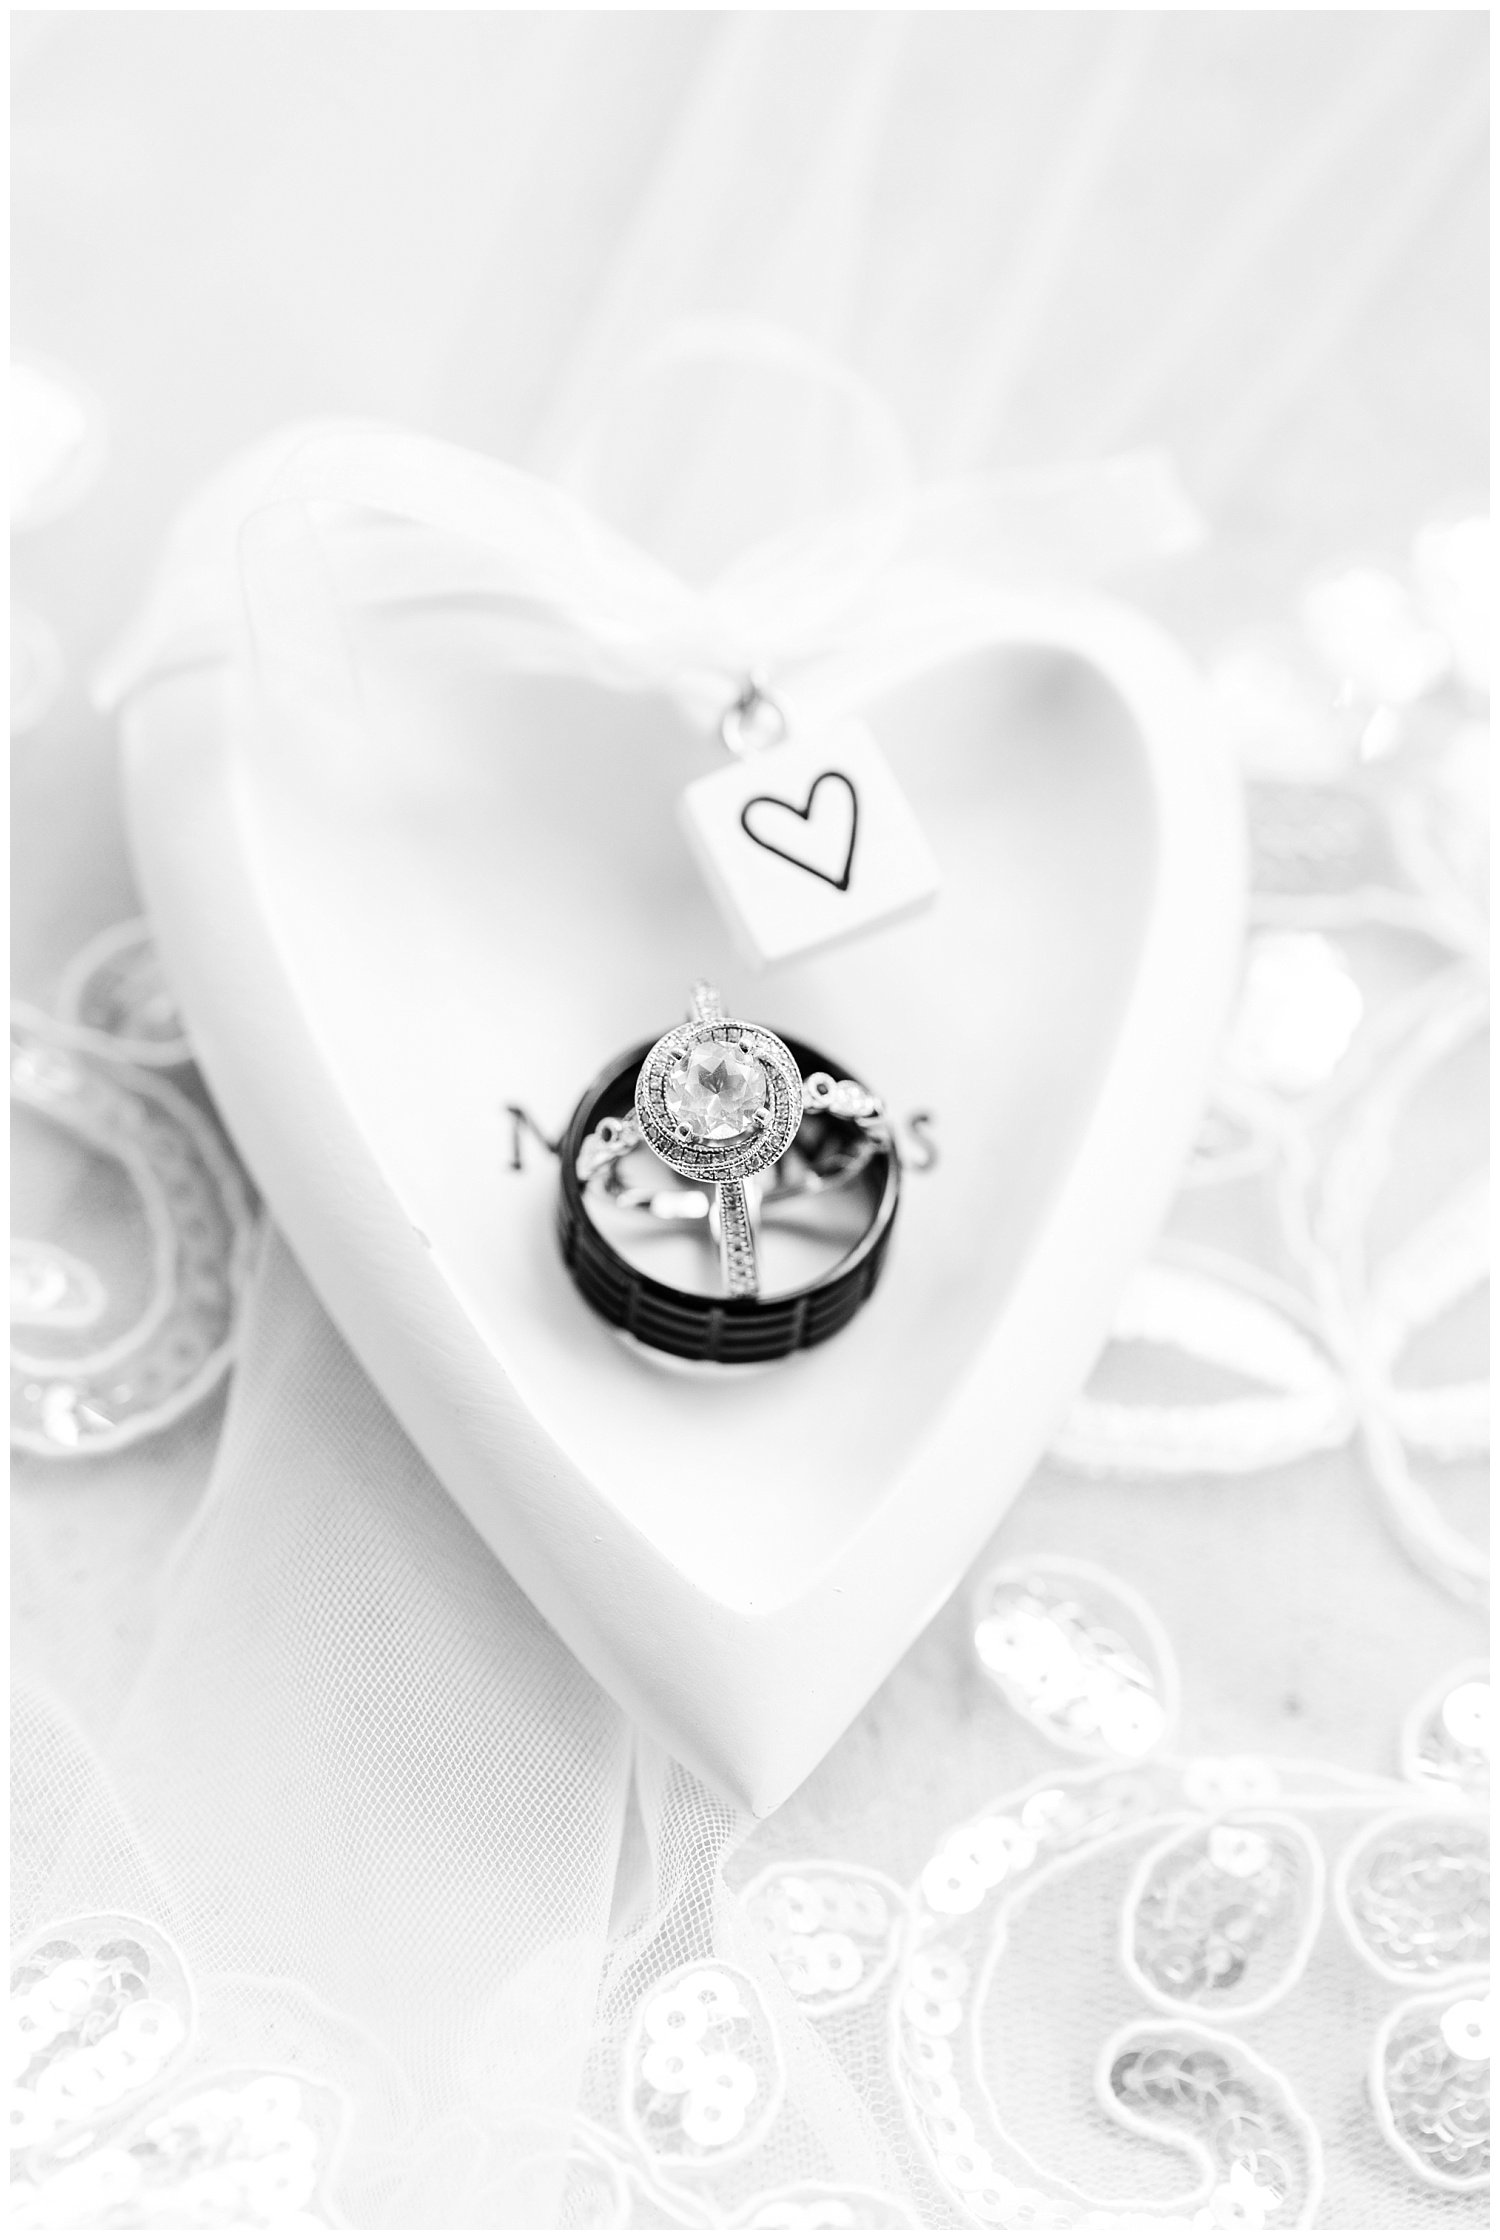 wedding rings sitting in a heart shaped dish 